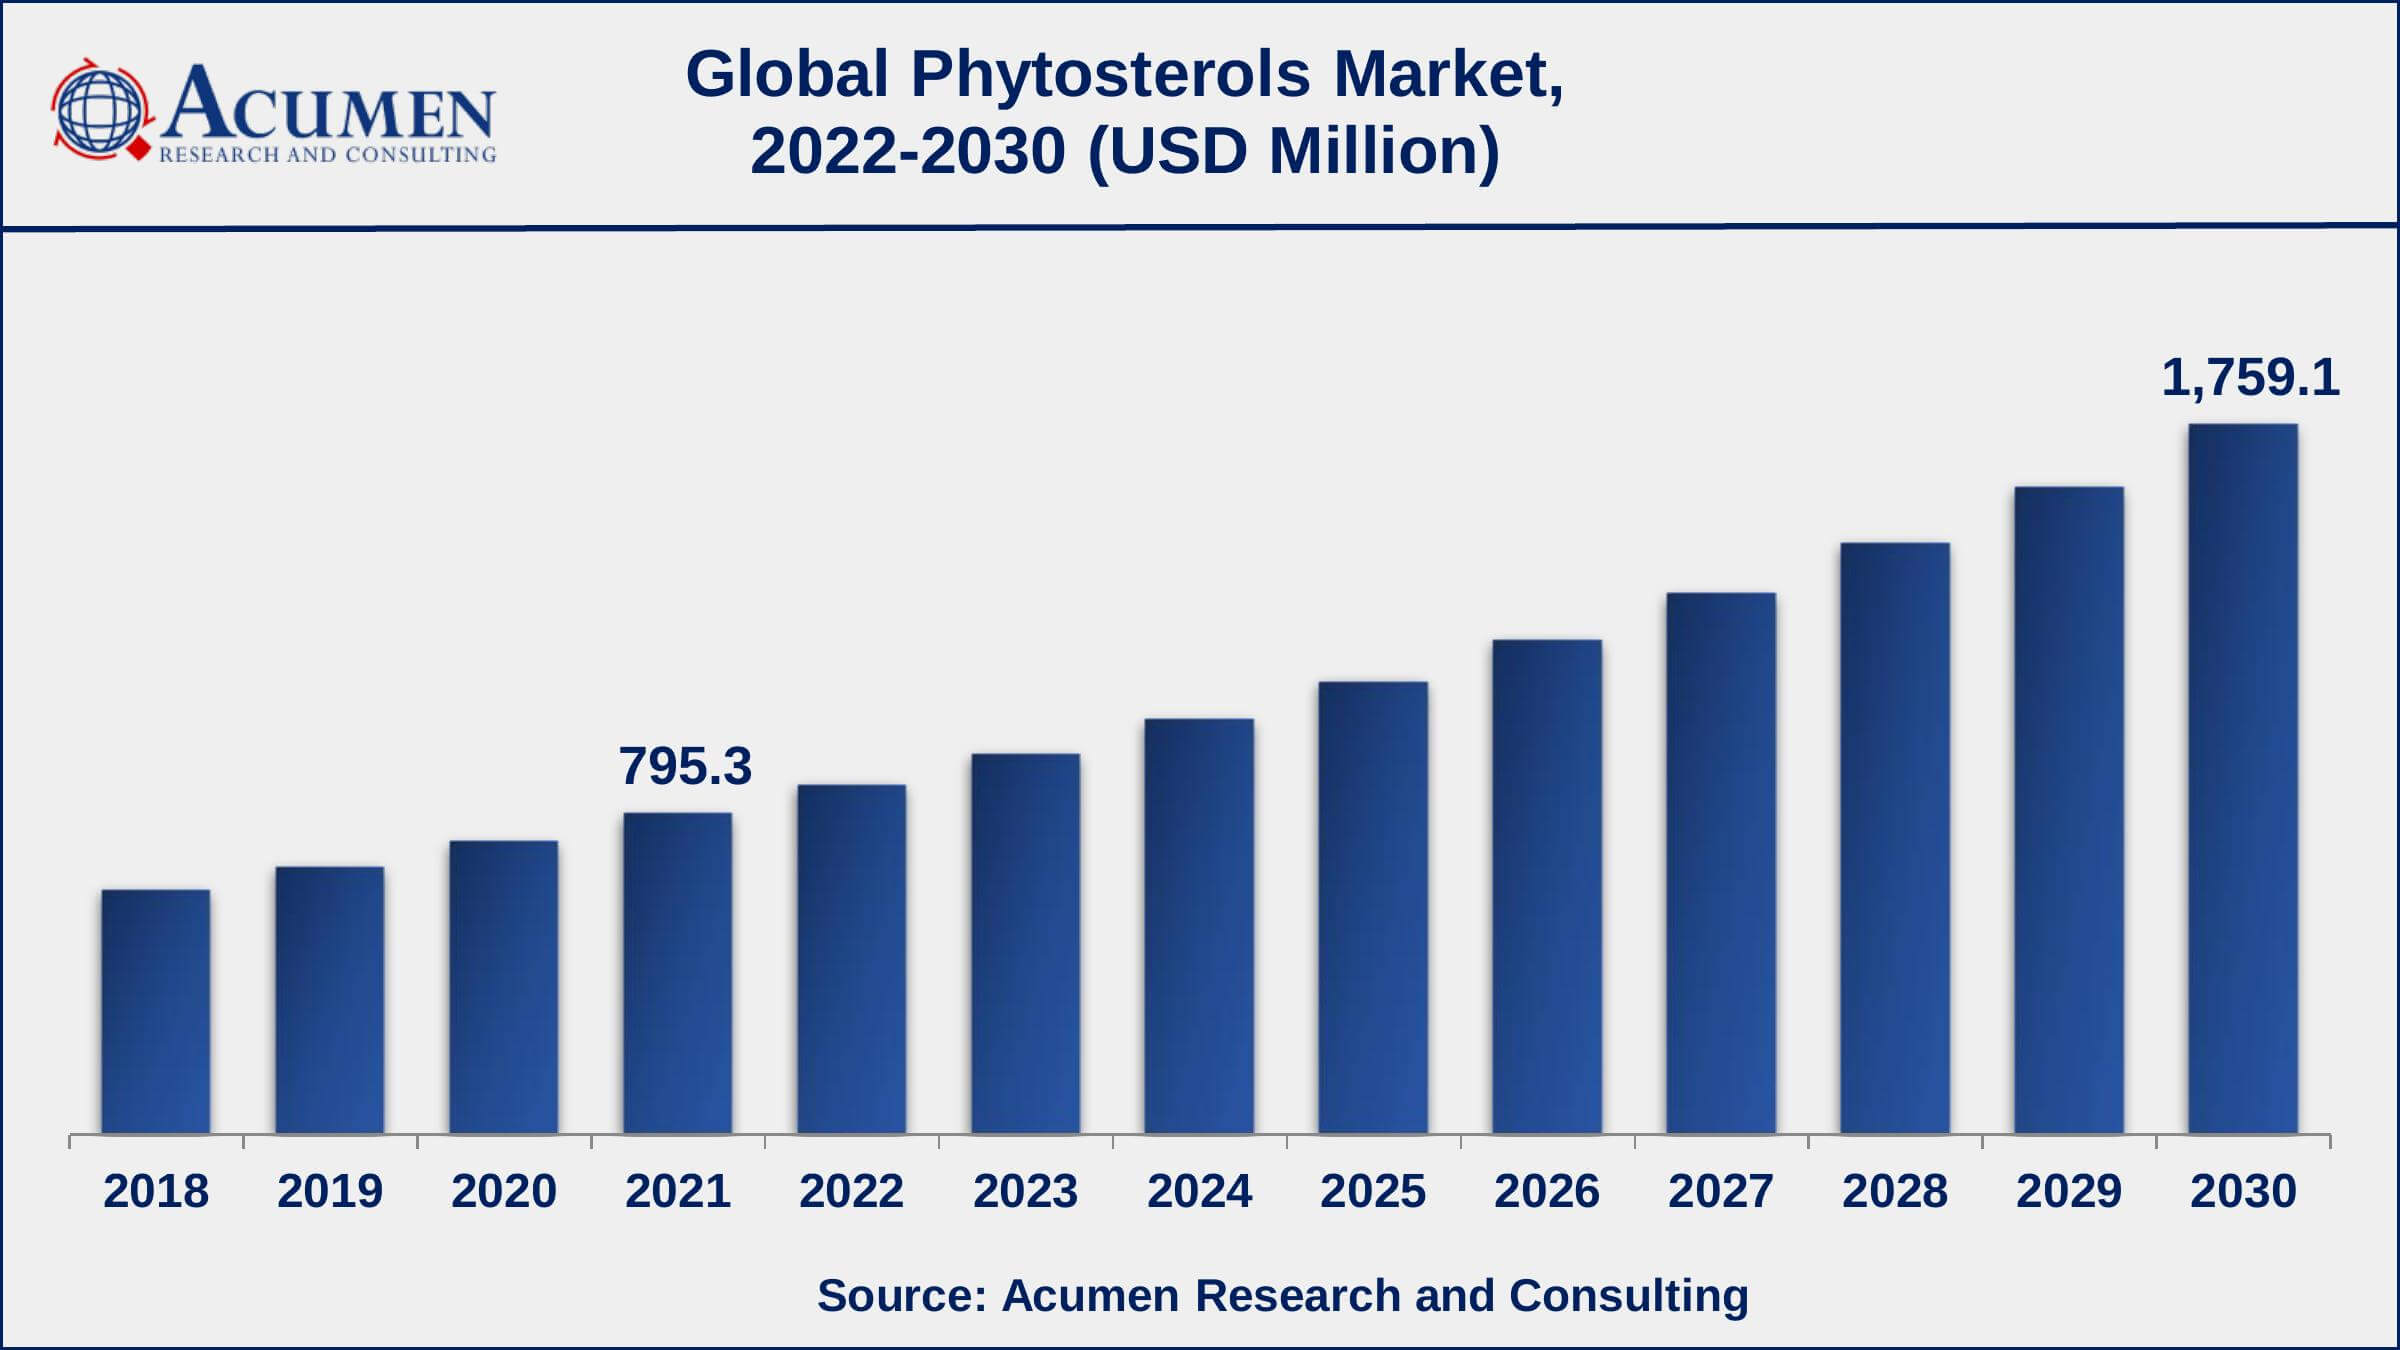 Asia-Pacific phytosterols market growth is assumed to record approx 10% CAGR from 2022 to 2030